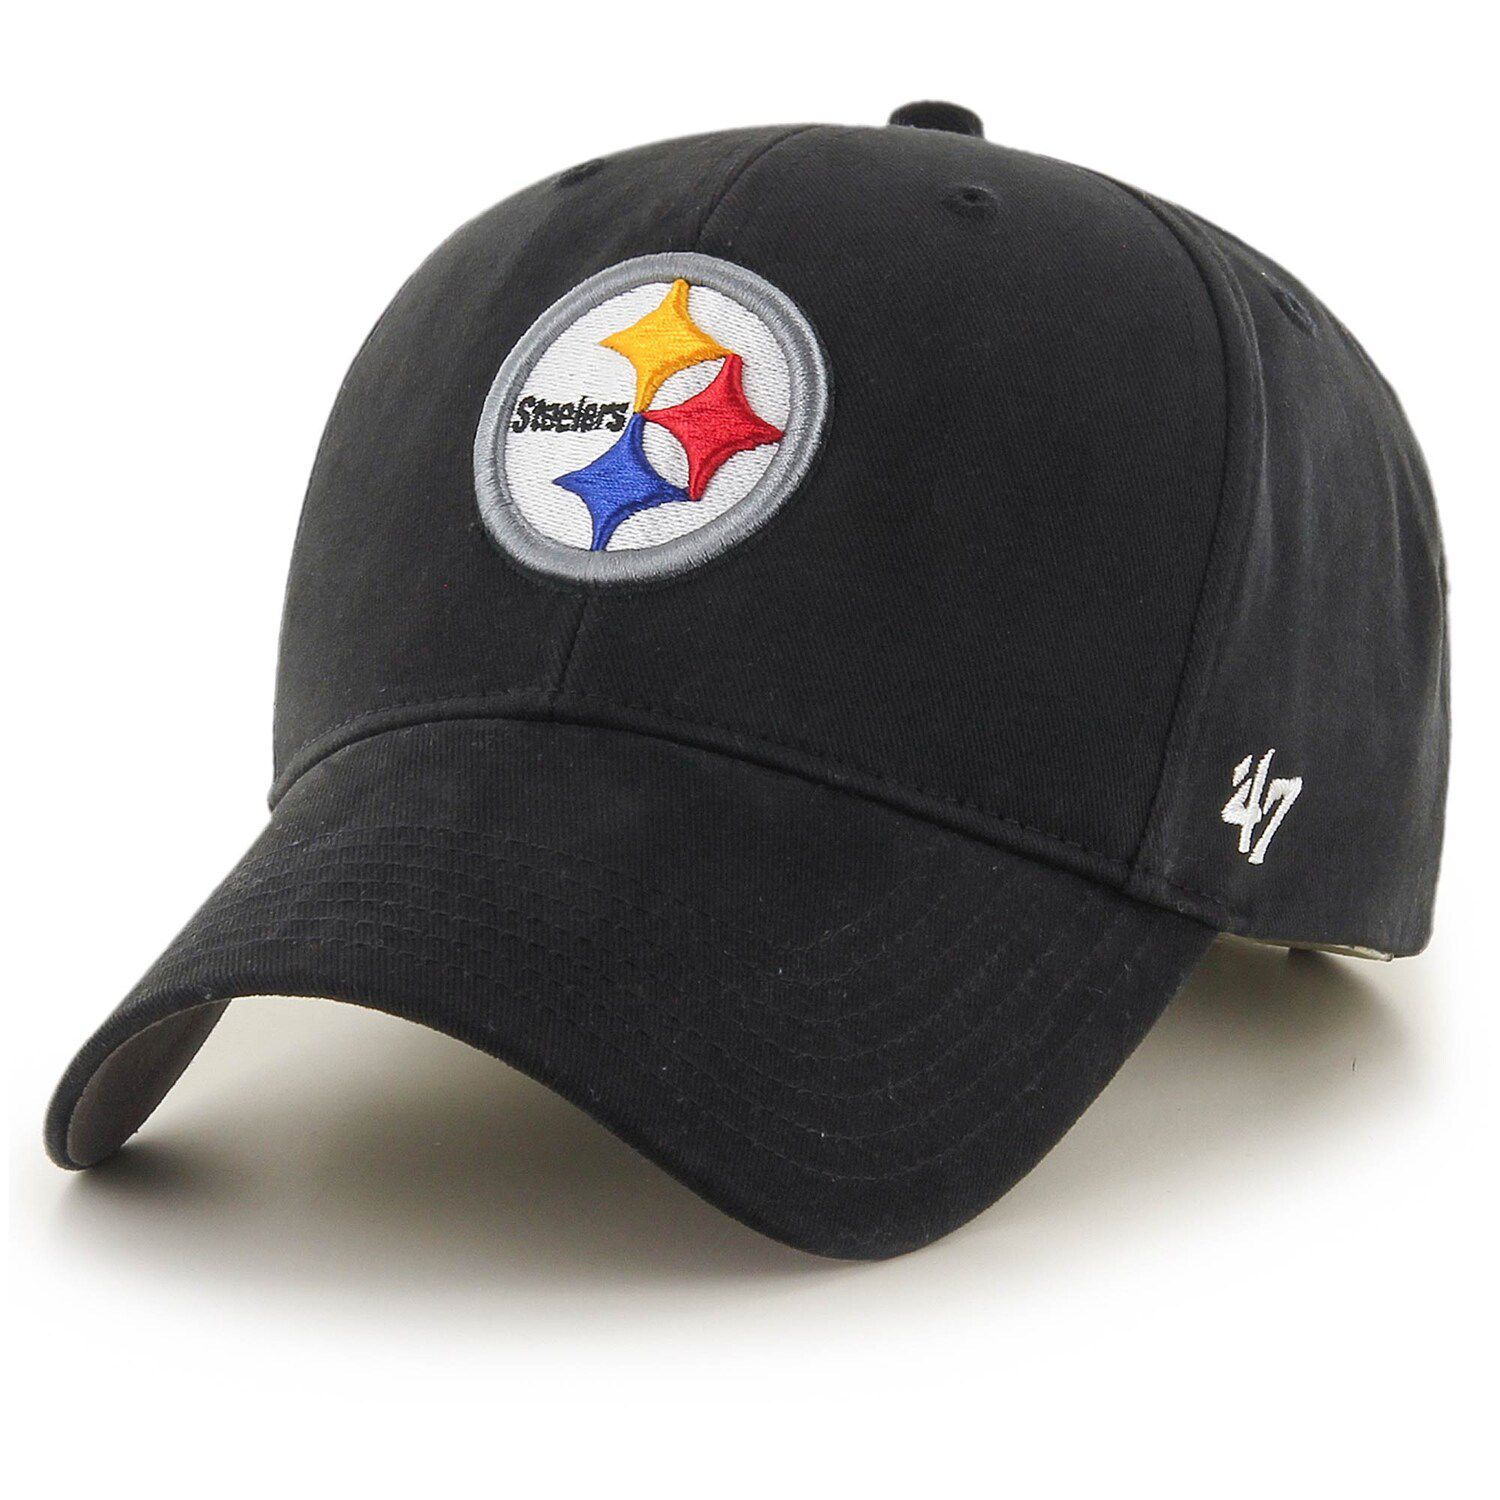 Pittsburgh Steelers New Era Toddler Cutie 9FORTY Flex Hat - White